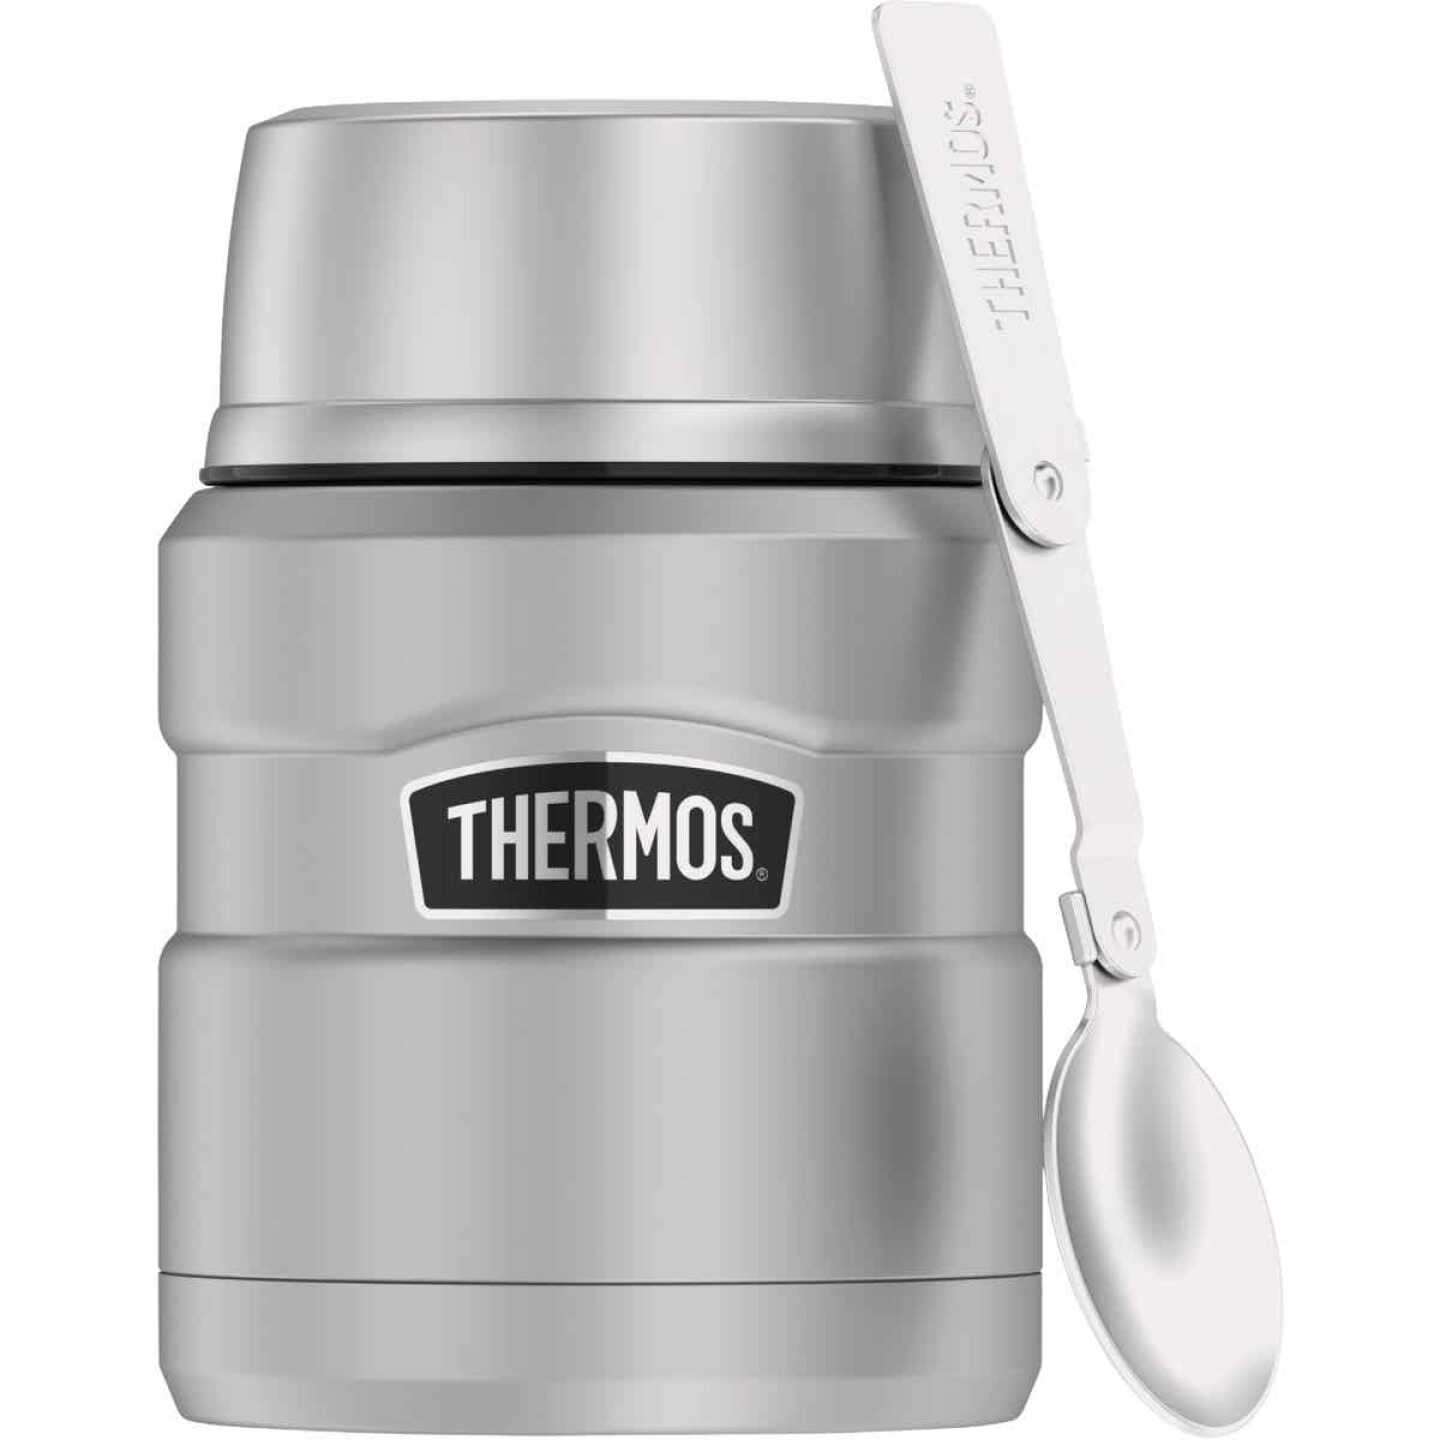 New Open Box Thermos Vacuum Insulated Wide Mouth Food Jar w/ Folding Spoon